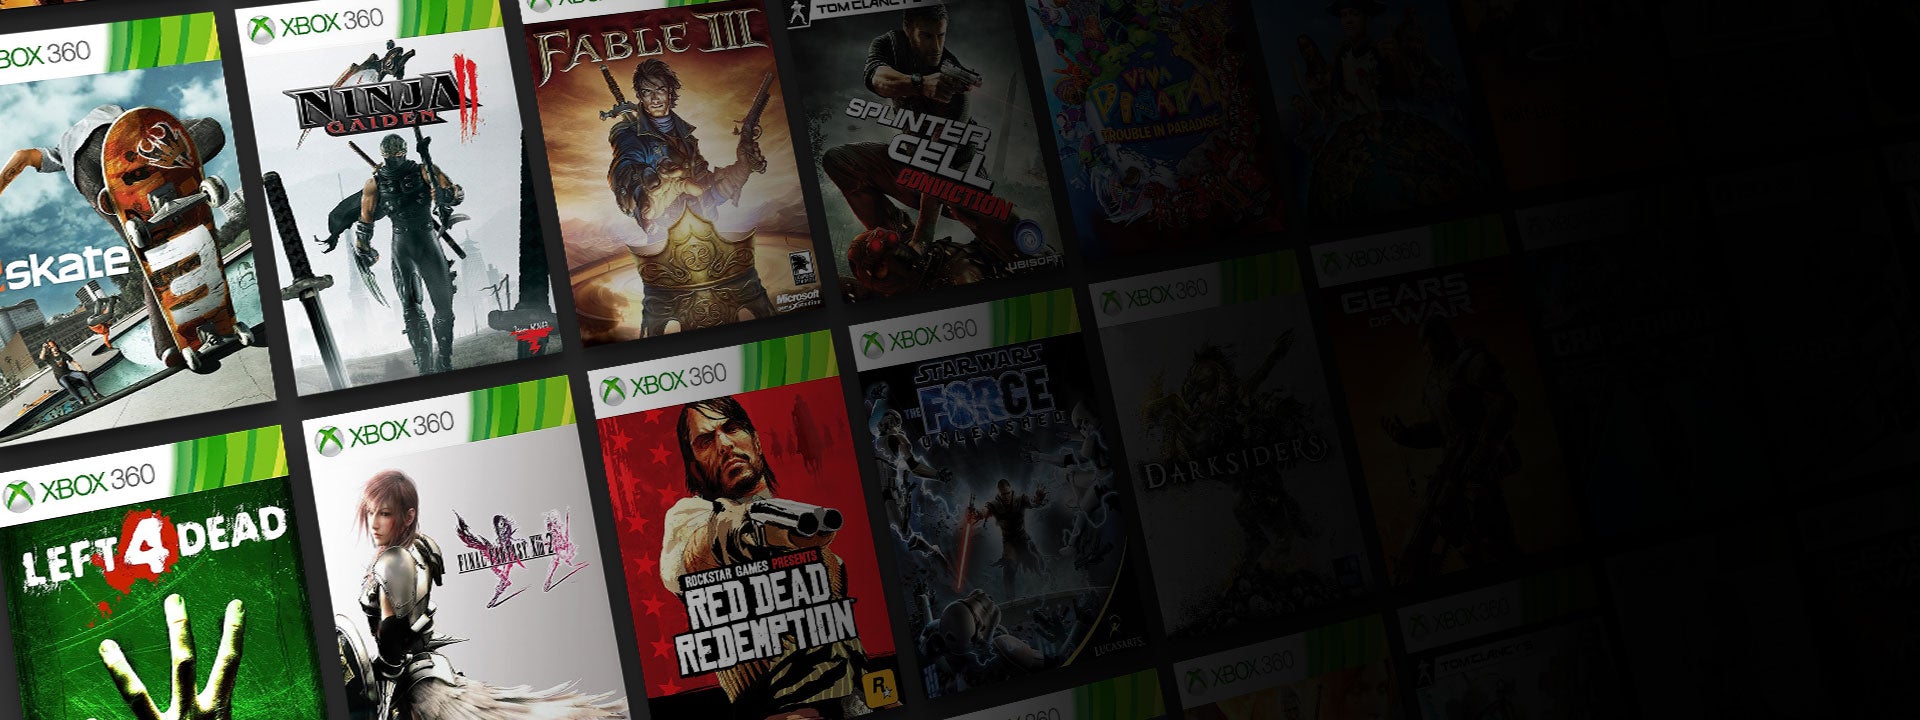 The Uphill Battle for Original Xbox Backwards Compatibility on Xbox 360